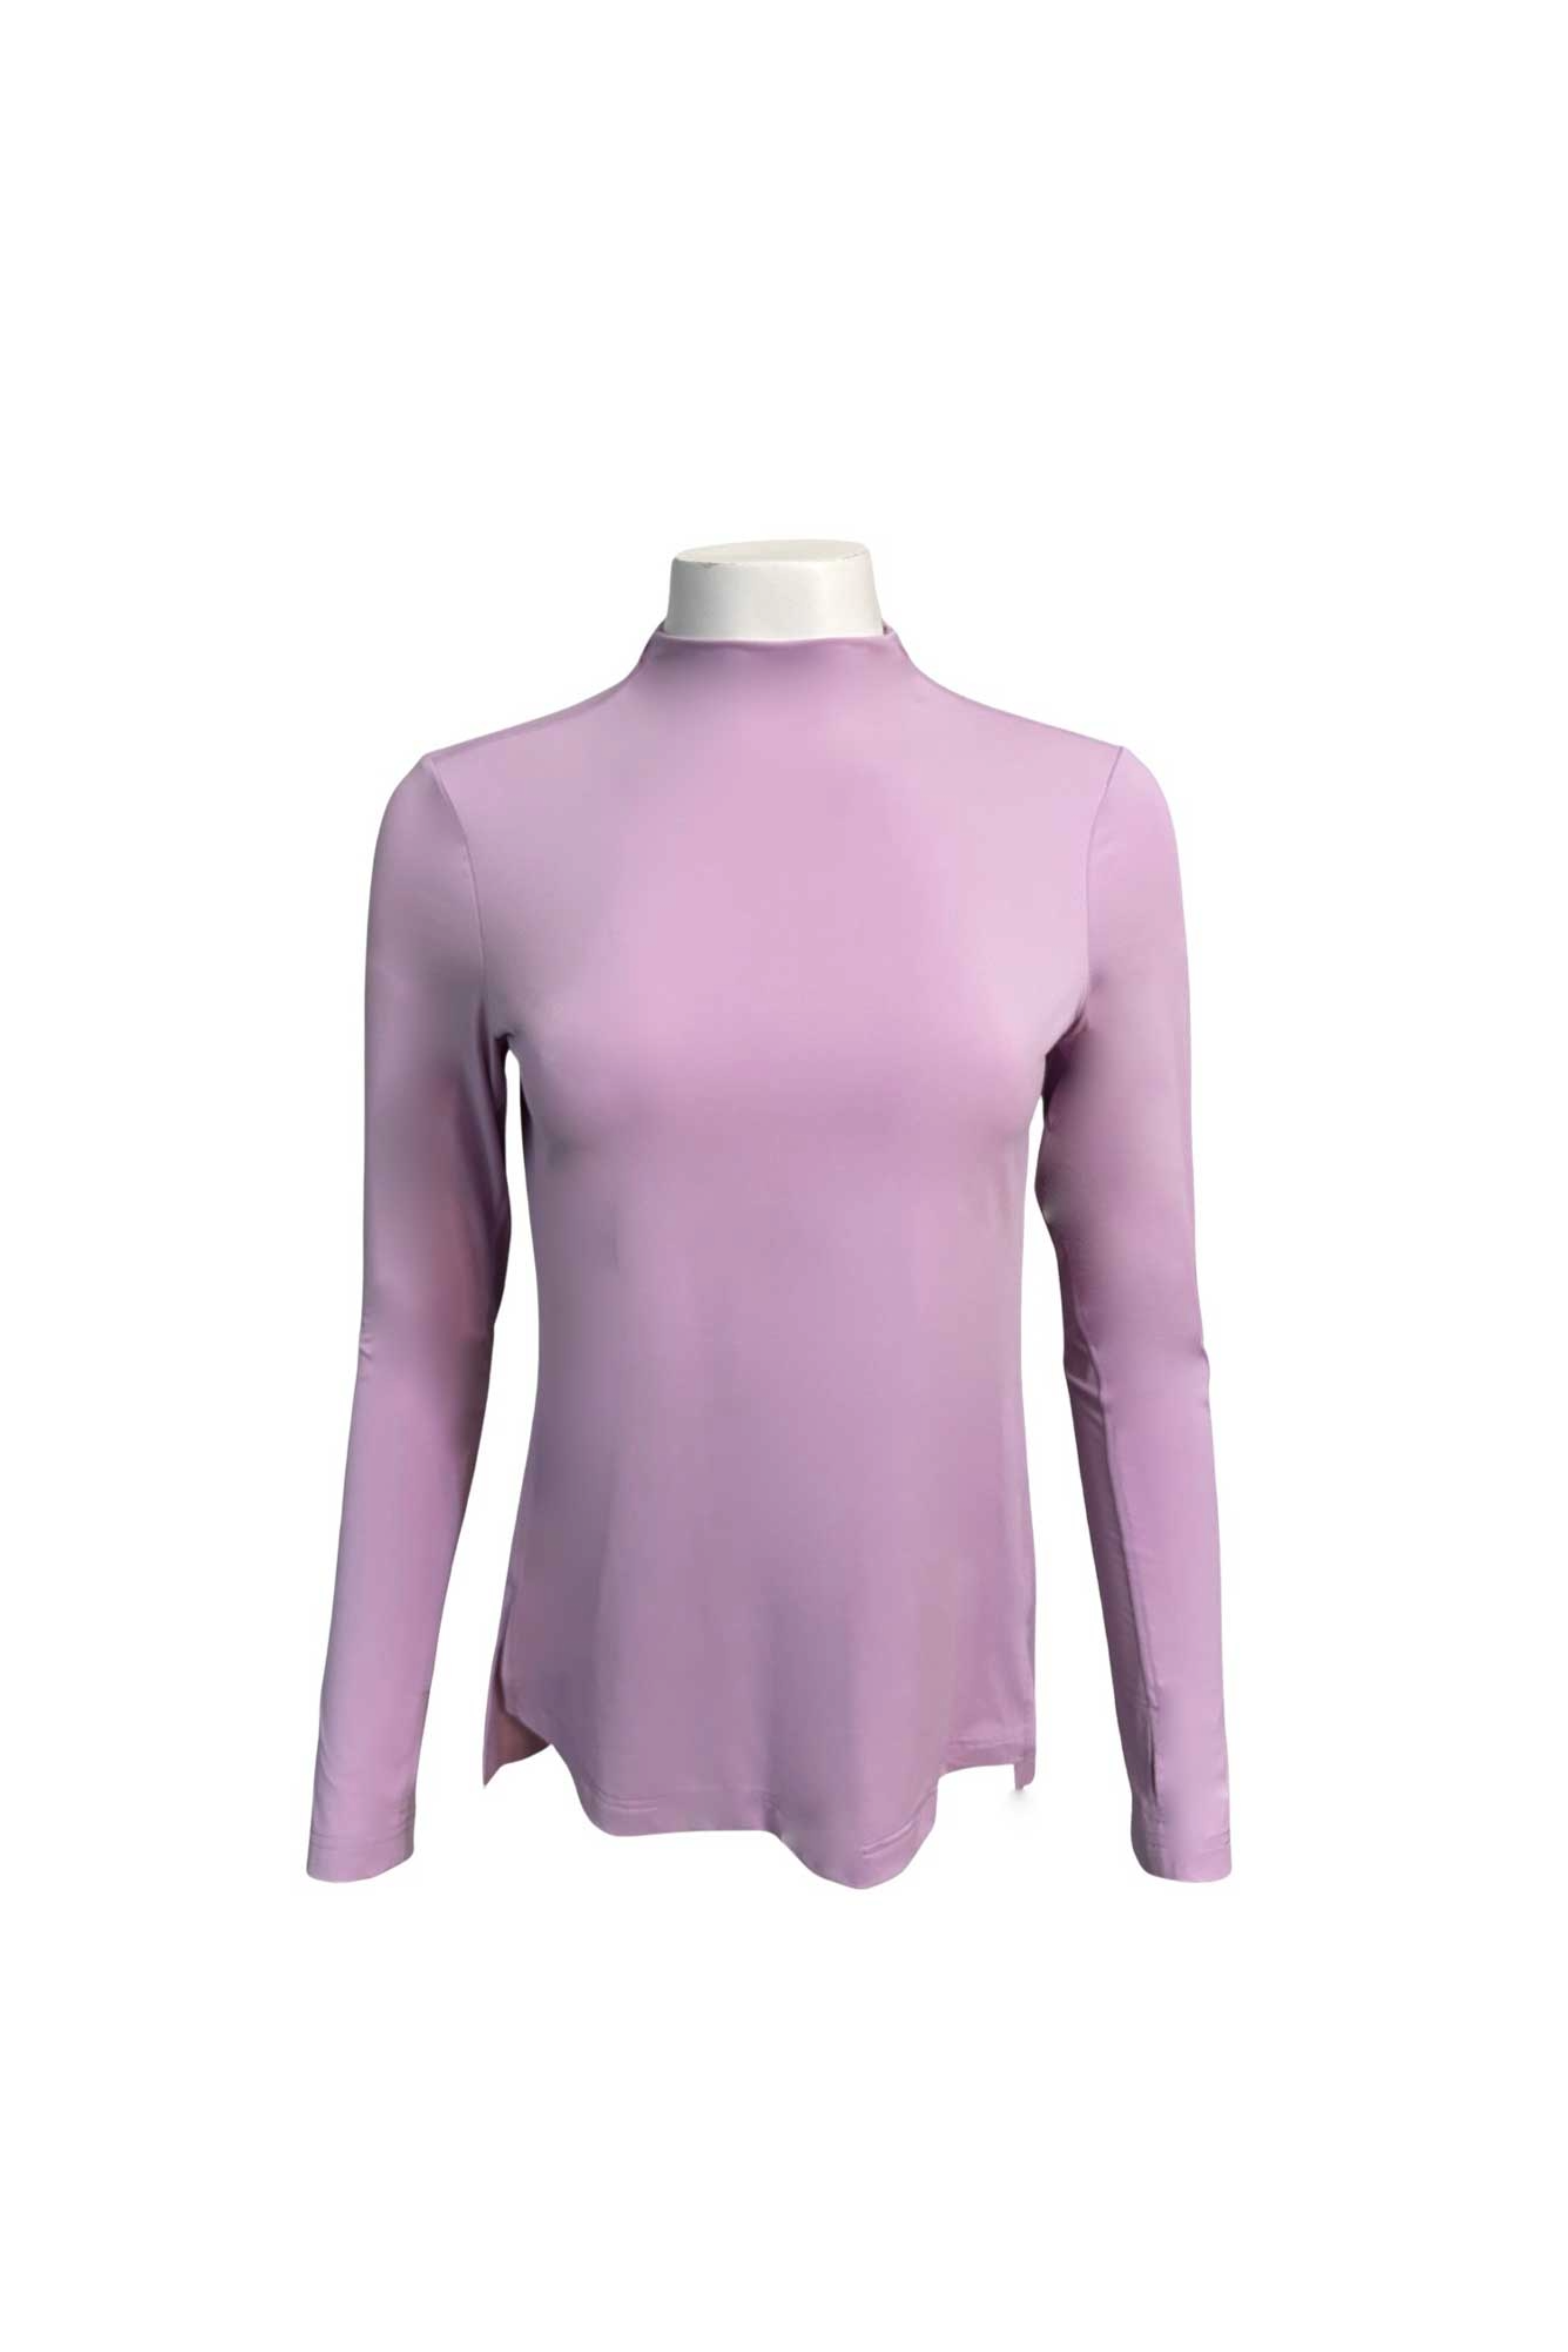 The Sunscreen Shirt in Lilac- UPF 50+ Total Coverage XXL